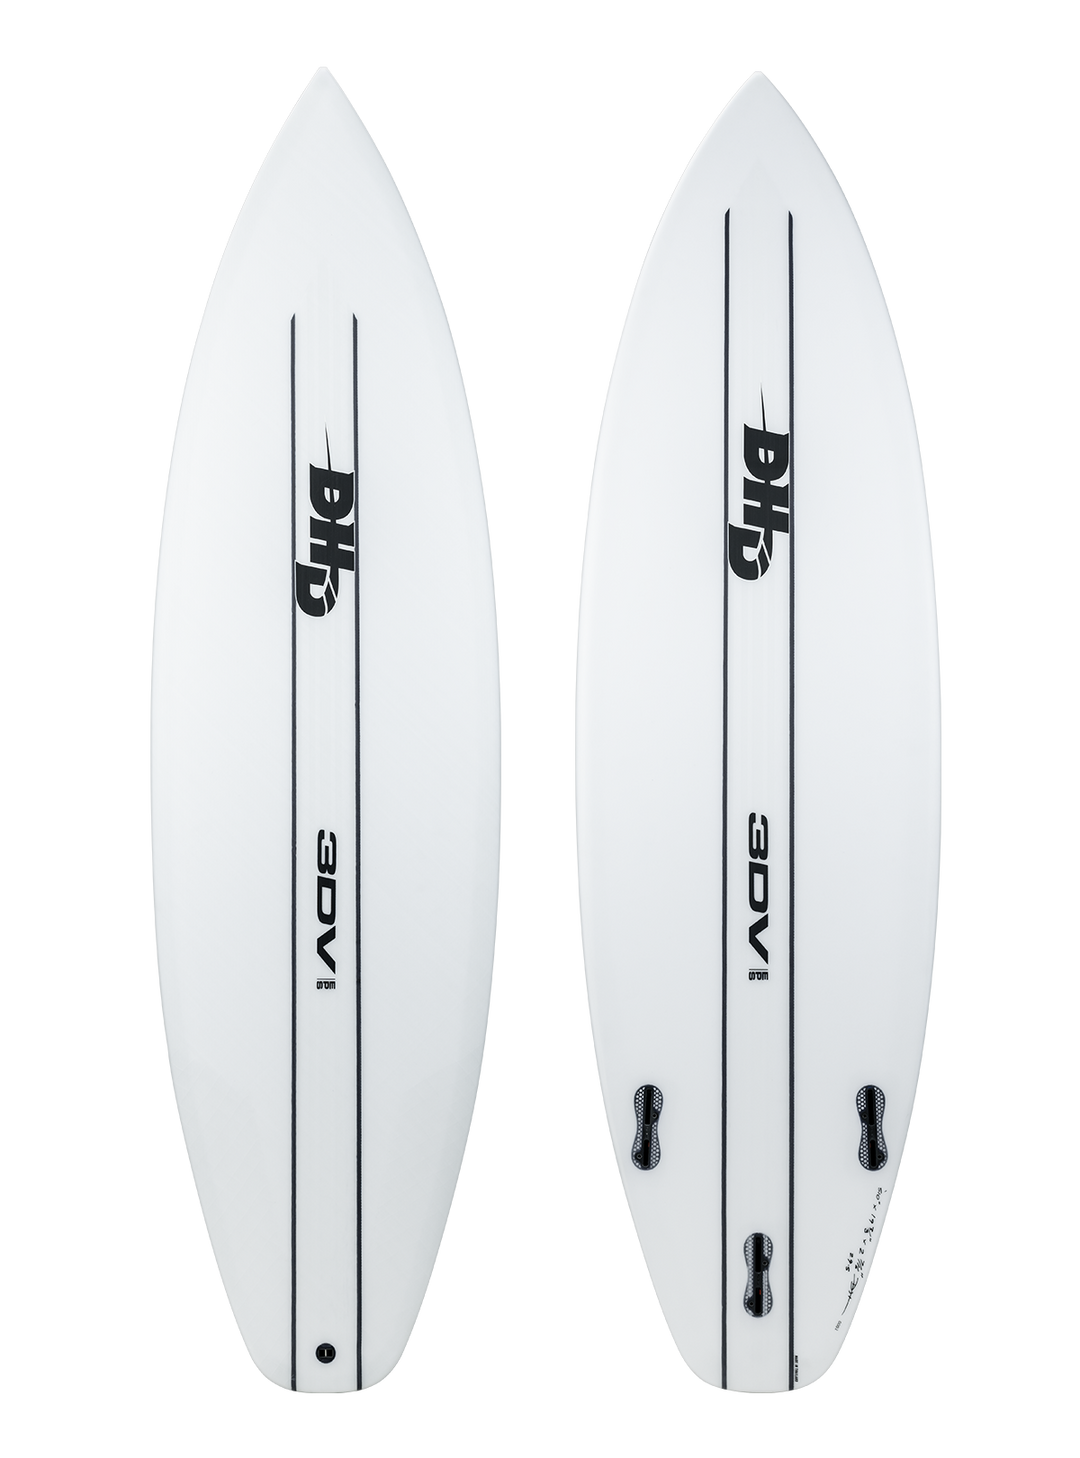 DX1 PHASE 3 – DHD SURF JAPAN